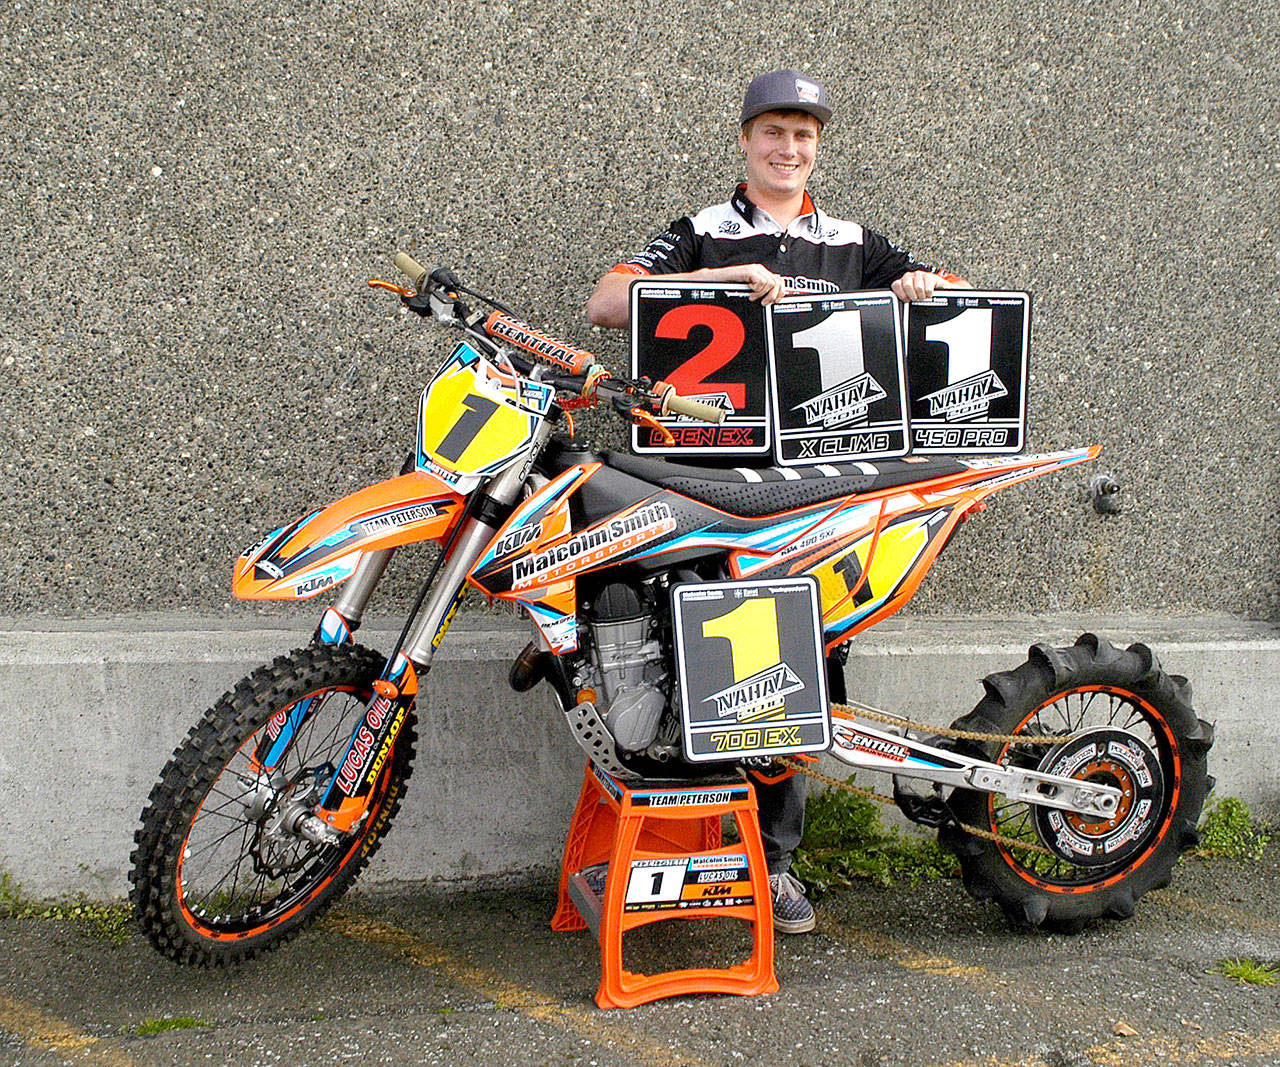 Port Angeles’ Jake Anstett with one of his uphill motorcycles and several of the trophies he has won this year hill climbing. Anstett was named the North American Hillclimbers Association Rider of the Year in 2018. (Pierre LaBossiere/Peninsula Daily News)